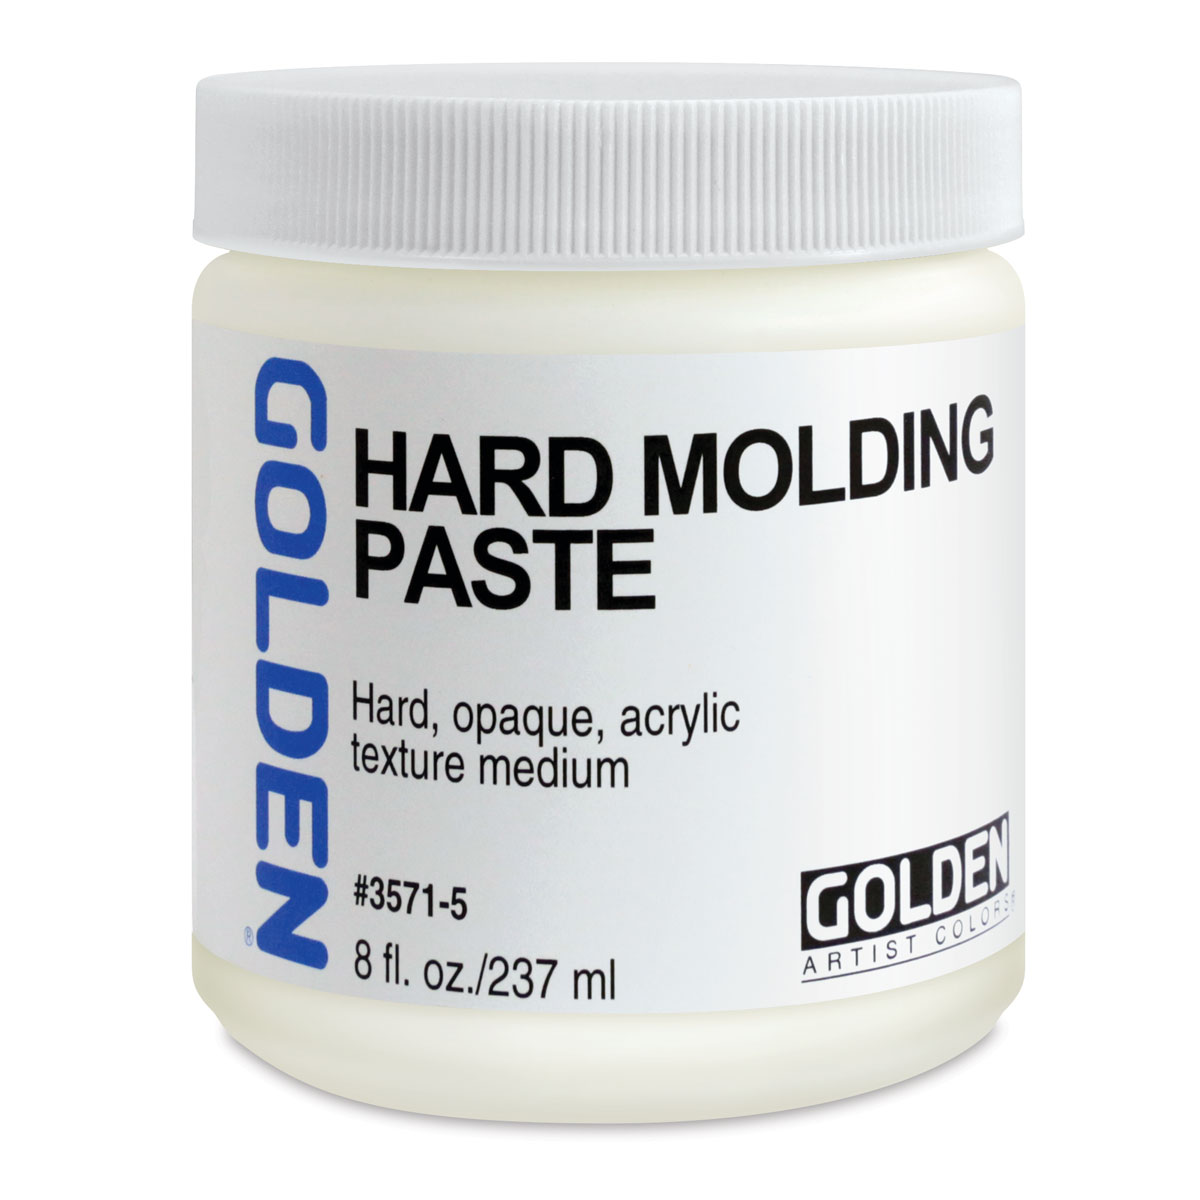 Golden Artist Color Hard Molding Paste for Acrylic Paint, Modeling Paste for Acrylic Paint, Opaque Acrylic Texture Paste, with Lumintrail Sticky